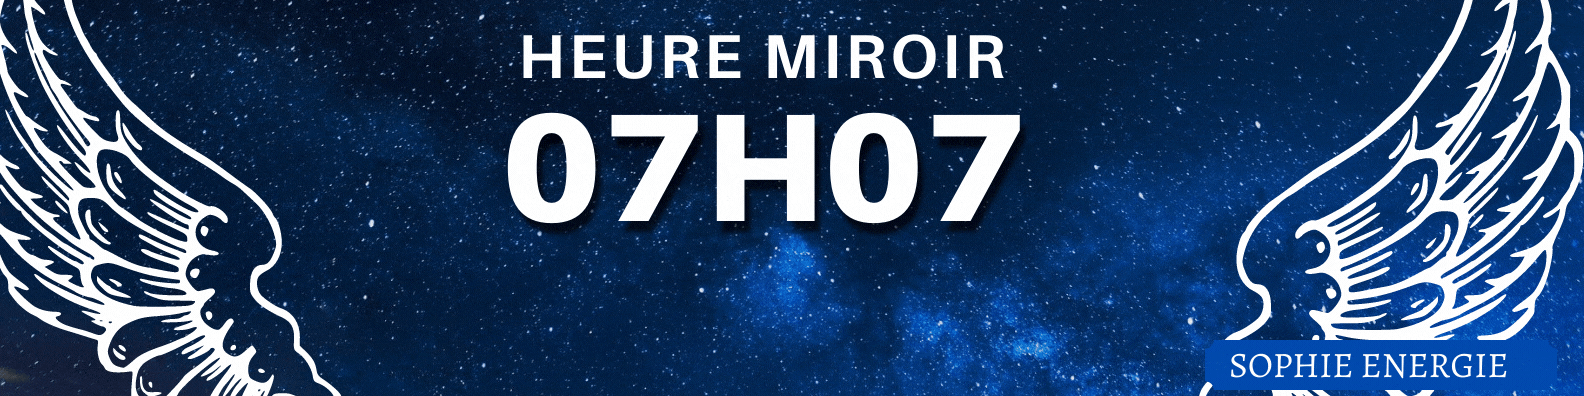 HEURE MIROIR anges 07h07